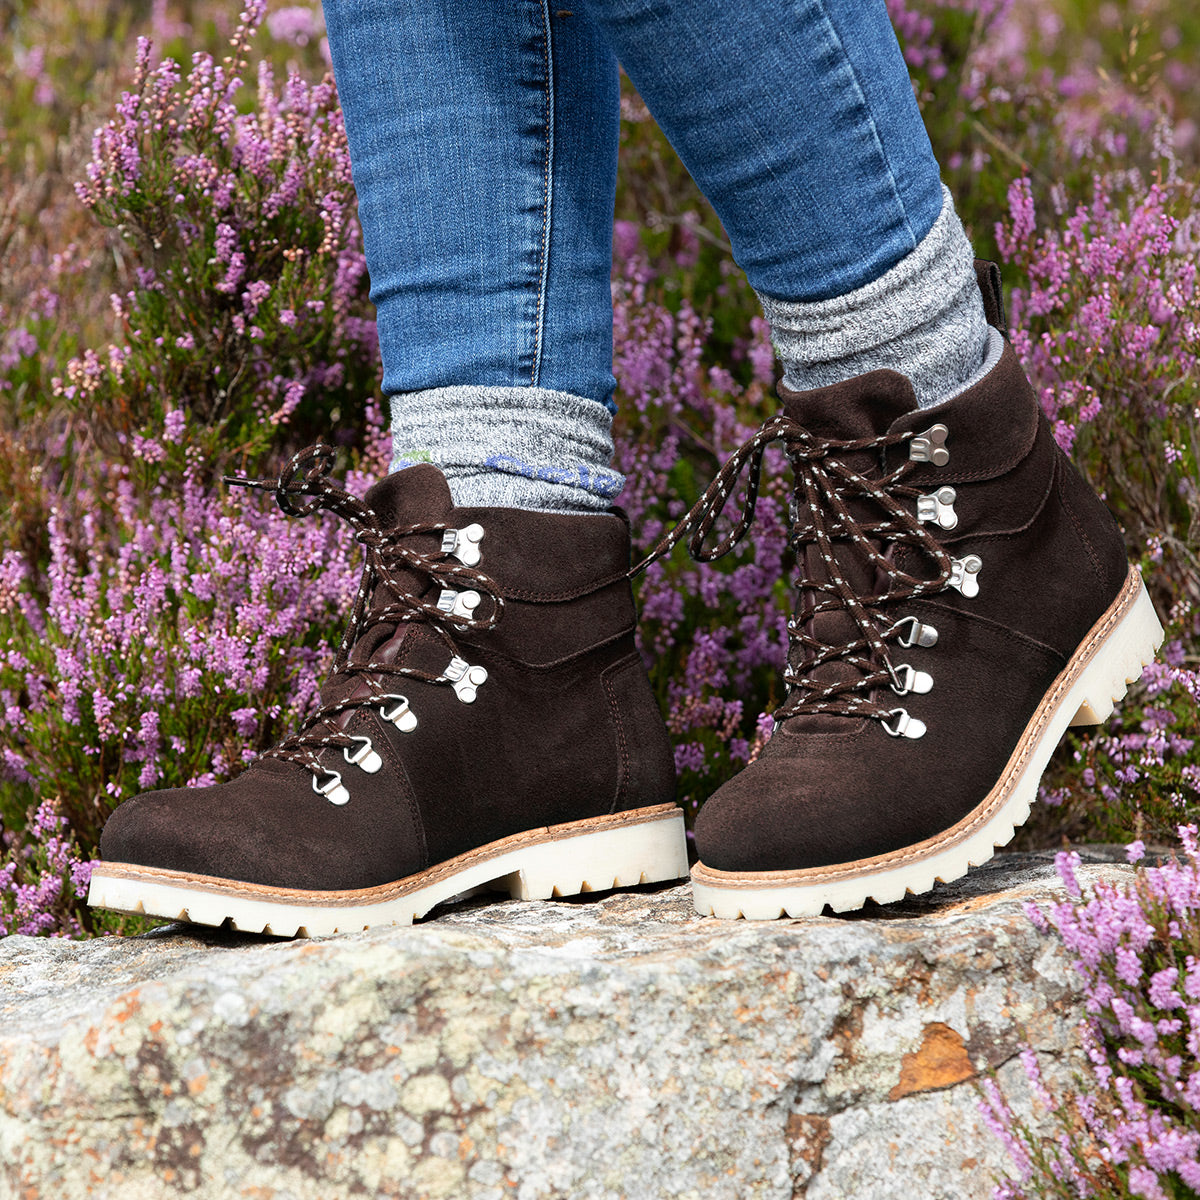 The best Walking Boots- Our complete guide